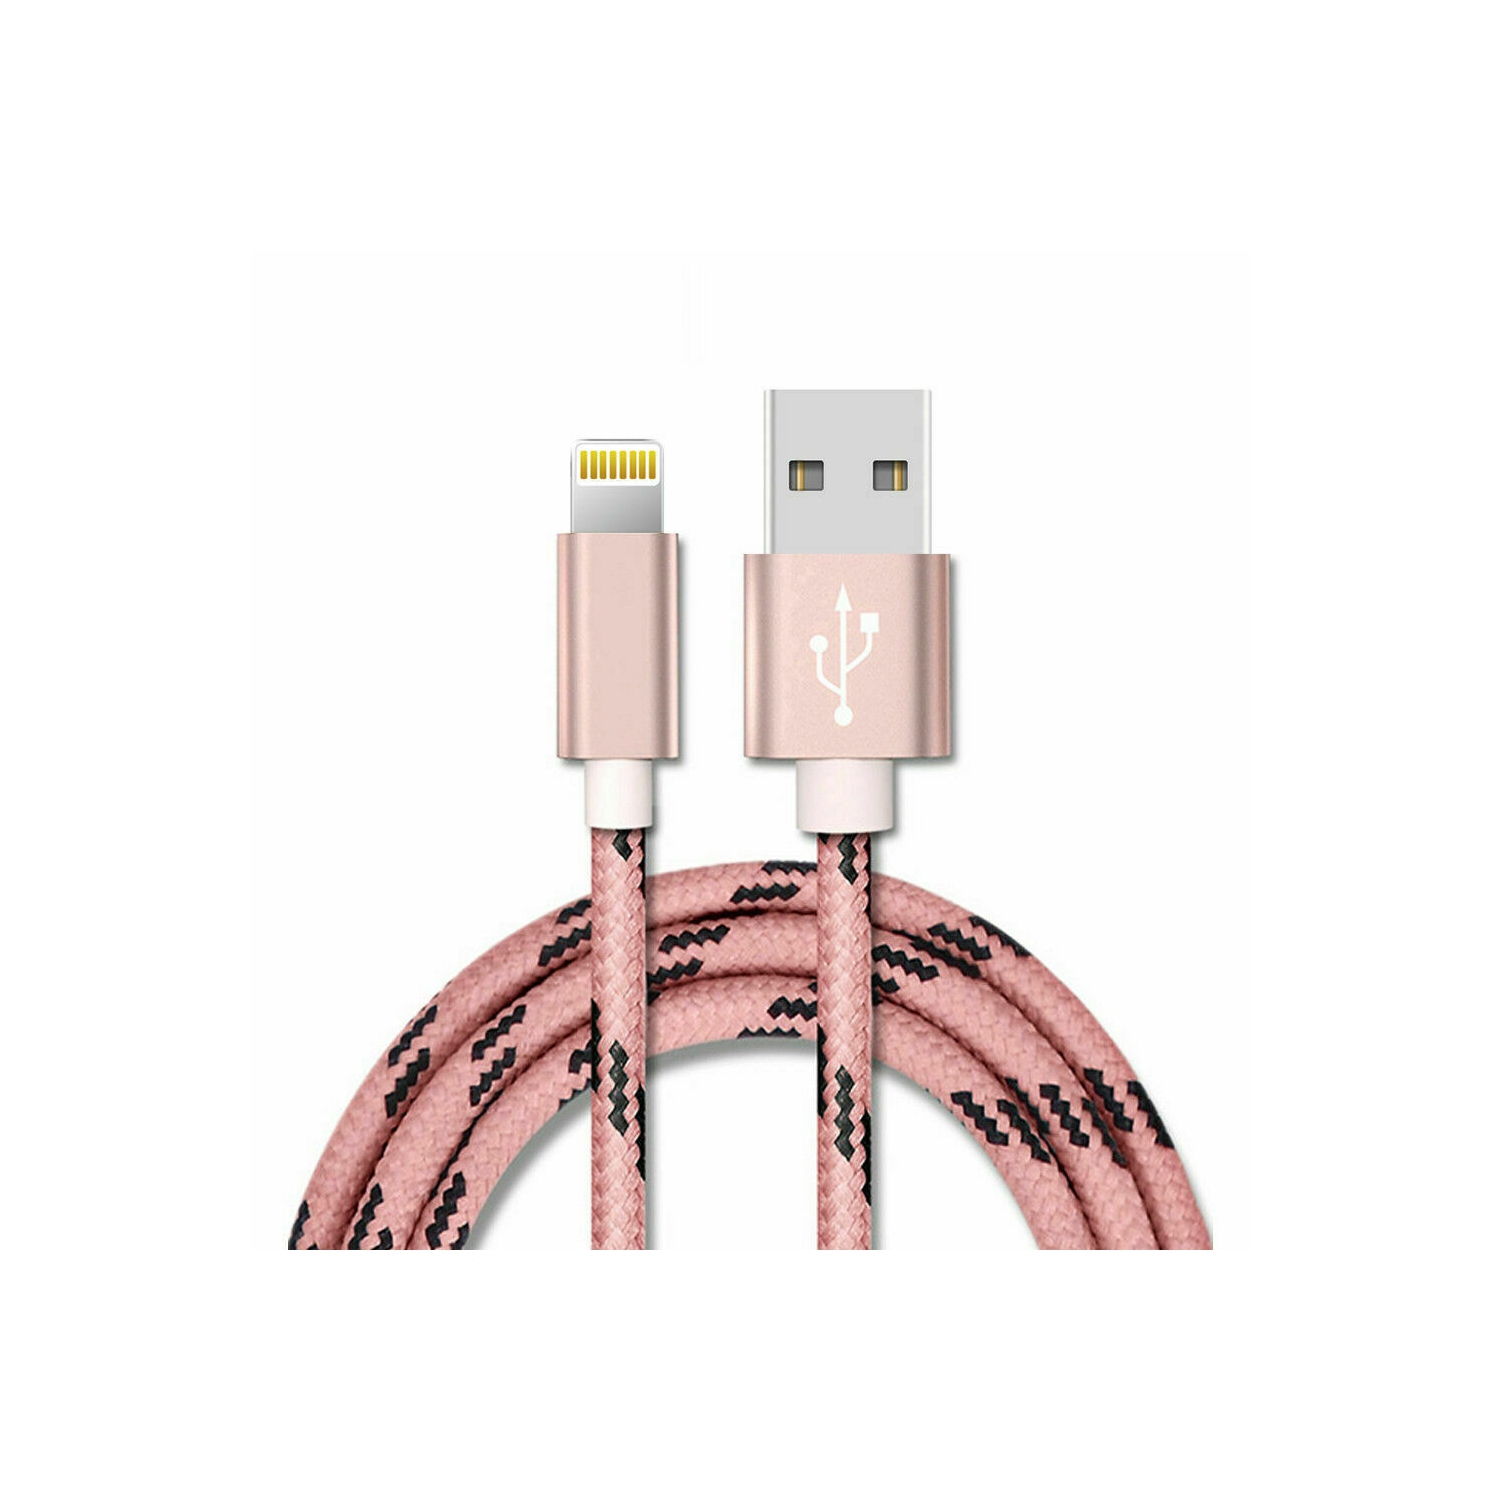 iPhone Charger Cable - 3FT iPhone iPad Charger Cord - Mfi Certified Lightning USB A Charging Cable for iPhone 14 13 12 SE 11 Xs Max XR X 8 7 6s Plus 5S iPad Mini iPod Airp